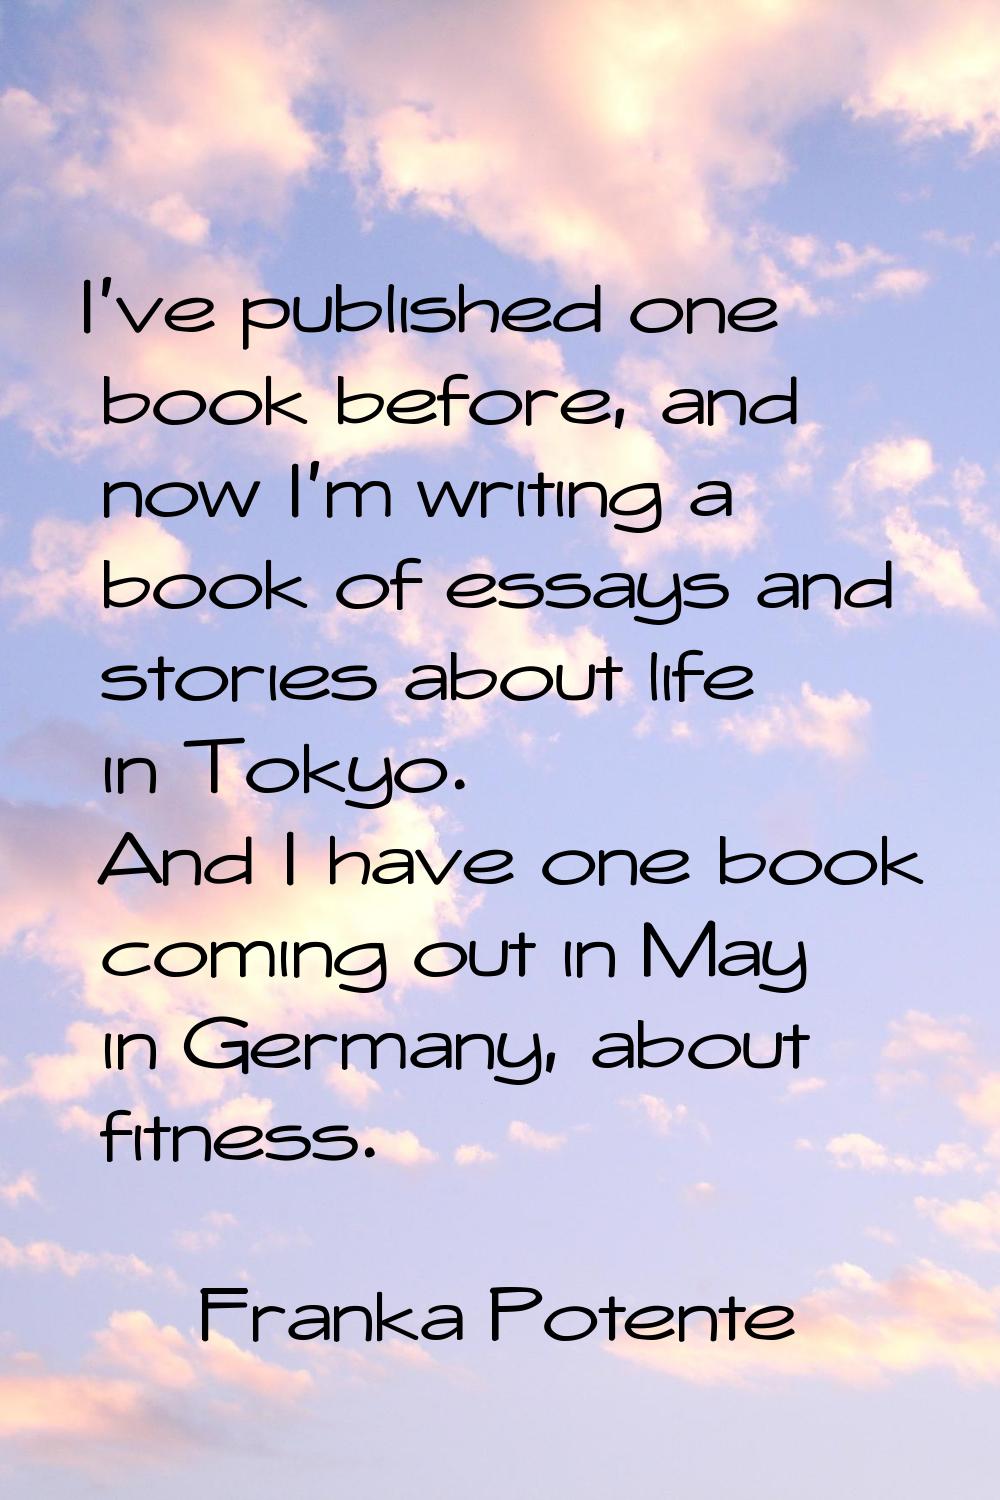 I've published one book before, and now I'm writing a book of essays and stories about life in Toky